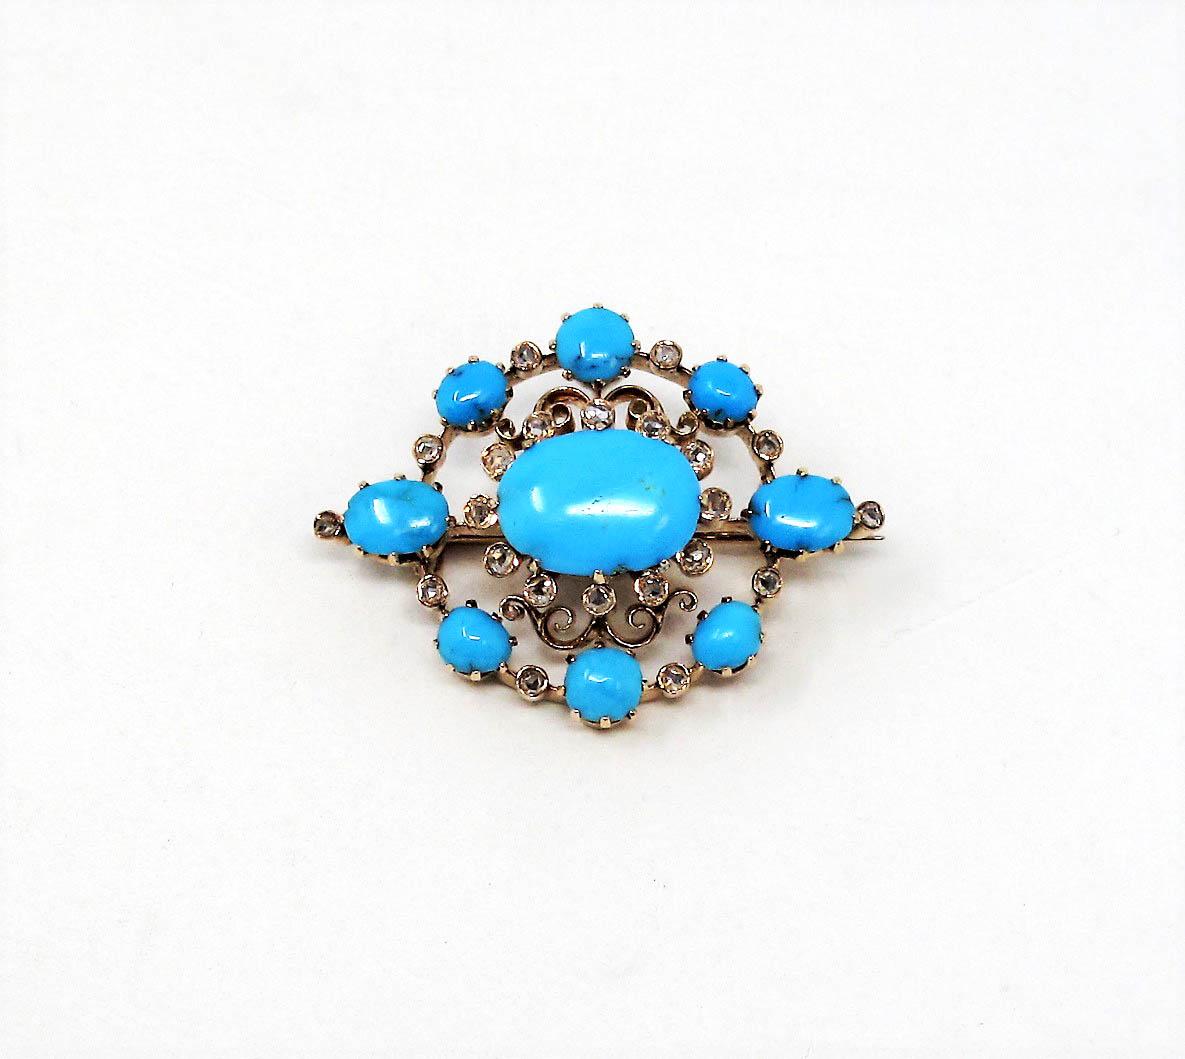 This incredible Victorian style turquoise and diamond brooch is an absolutely stunning piece of history. Set in a horizontal layout, the brooch pops with vibrant turquoise stones and sparkles with glittering diamond accents. Pair on a scarf,